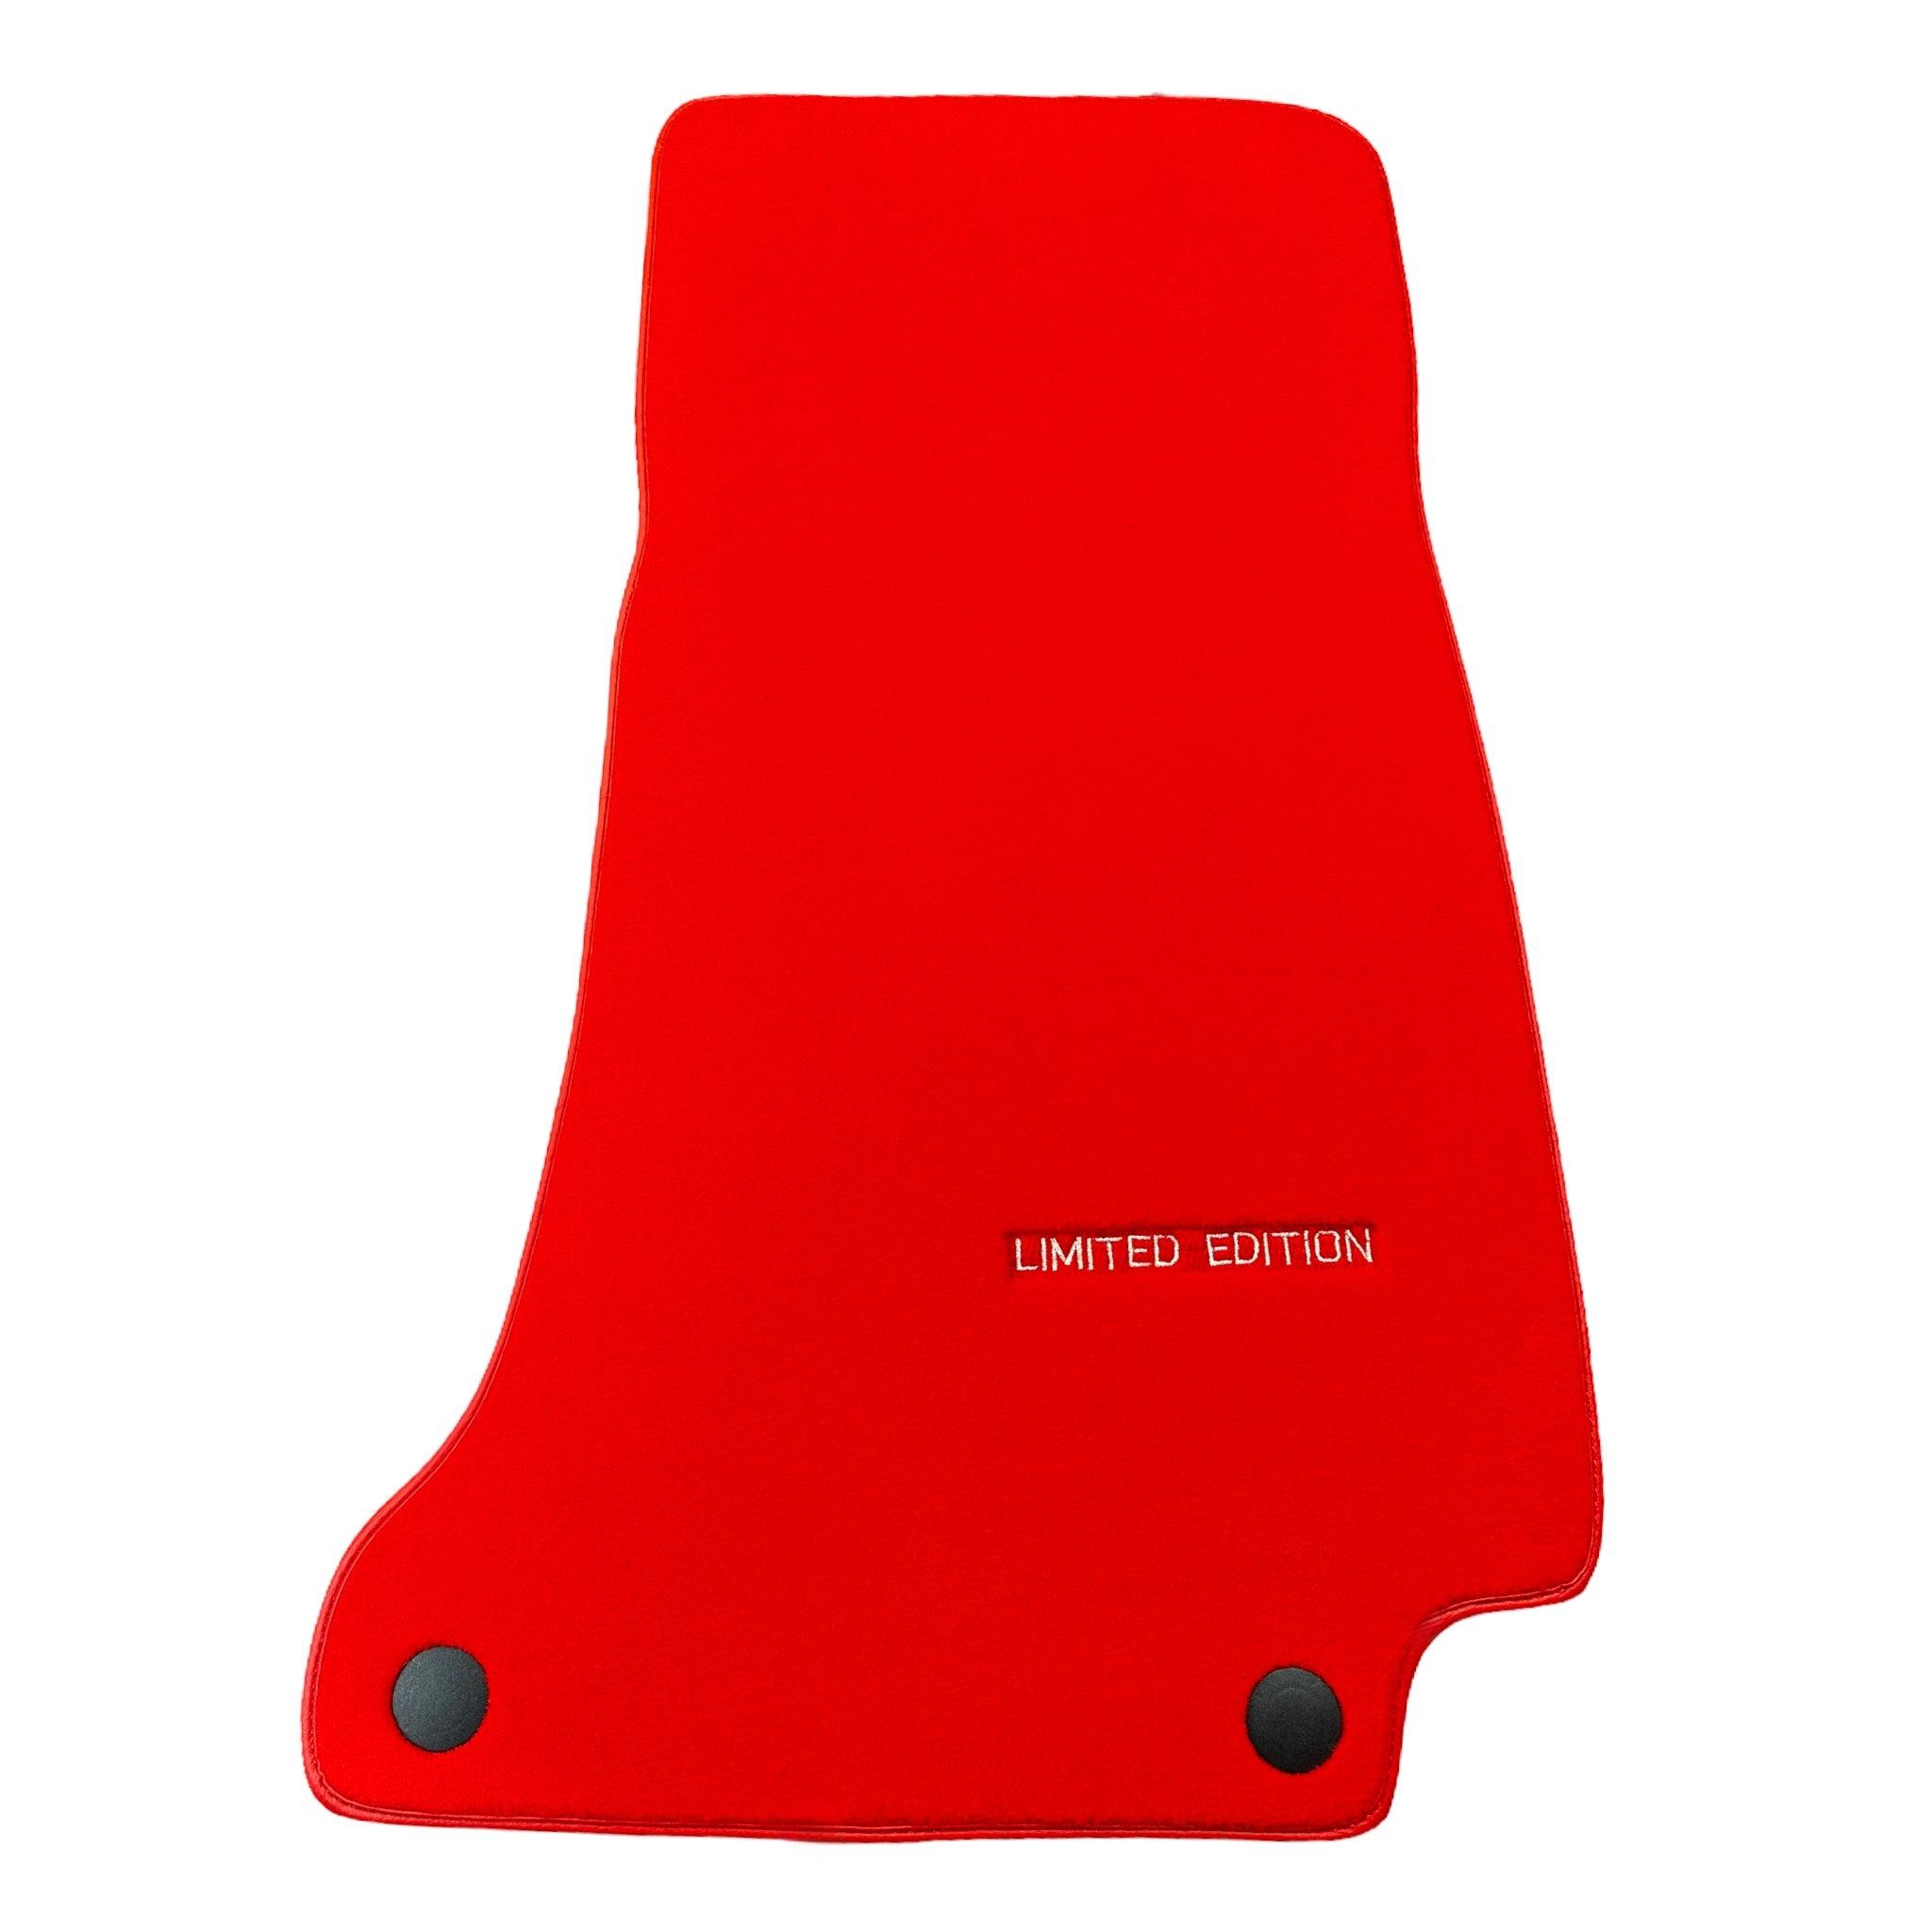 Red Floor Mats For Mercedes Benz E-Class W211 Sedan 4Matic (2002-2009) | Limited Edition